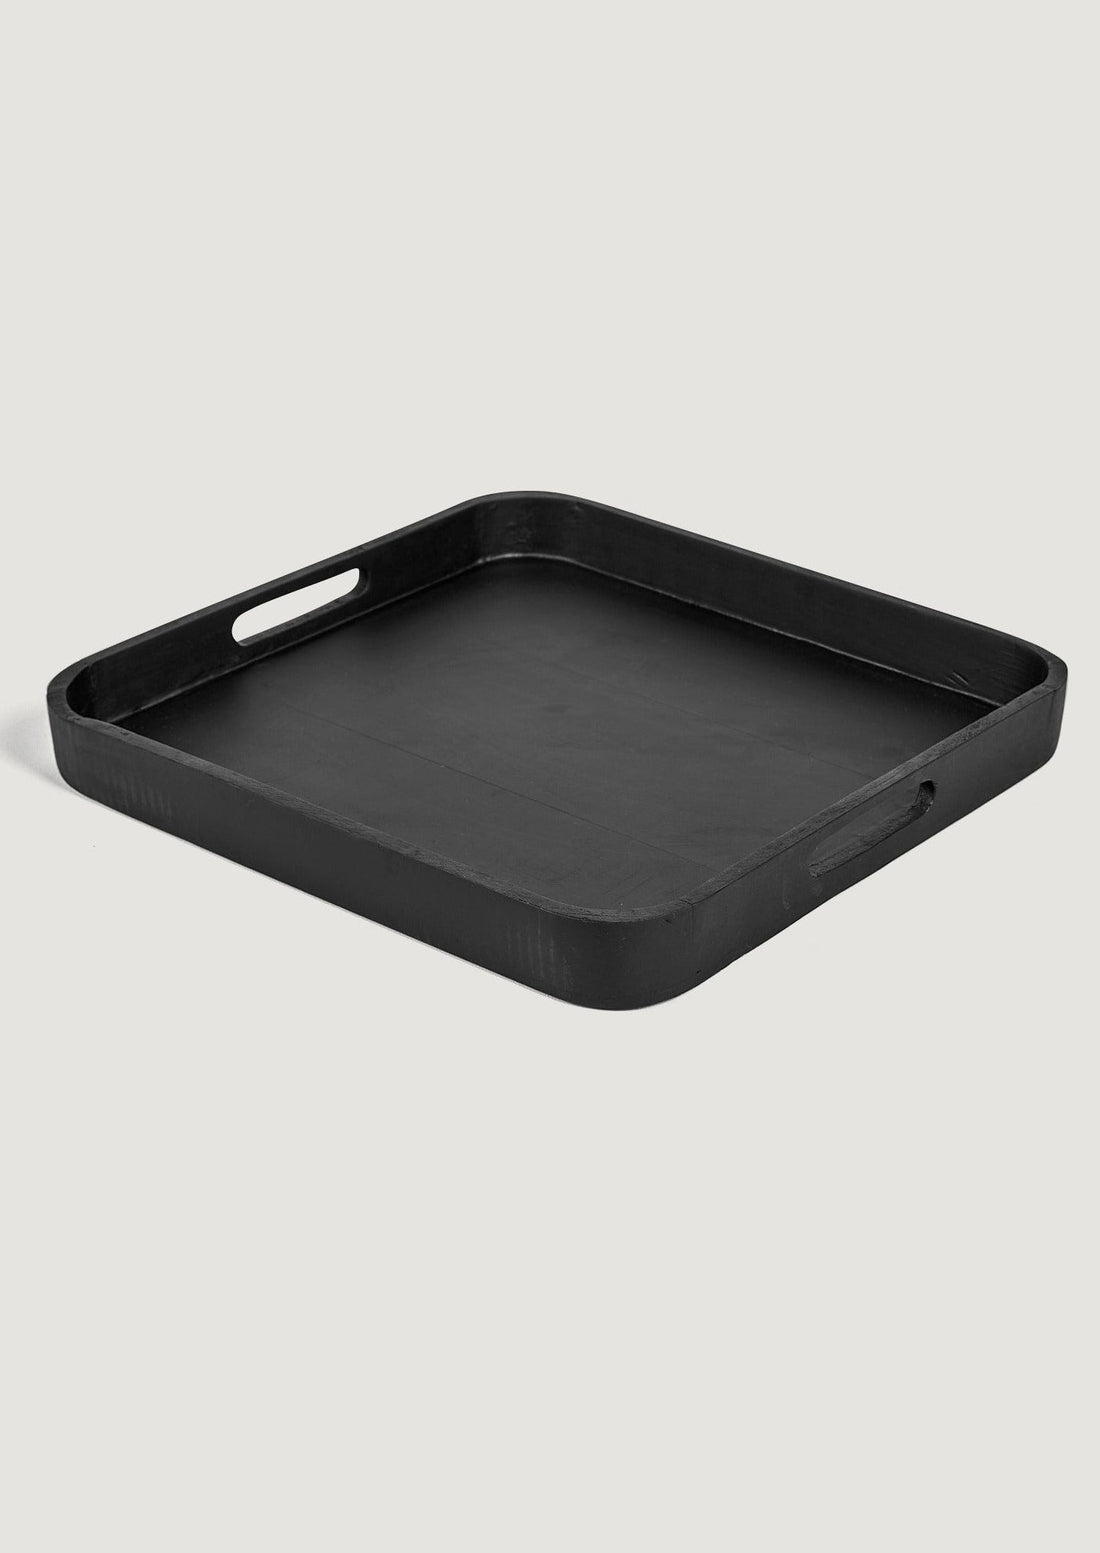 Afloral Home Decor Black Wood Square Tray with Handles